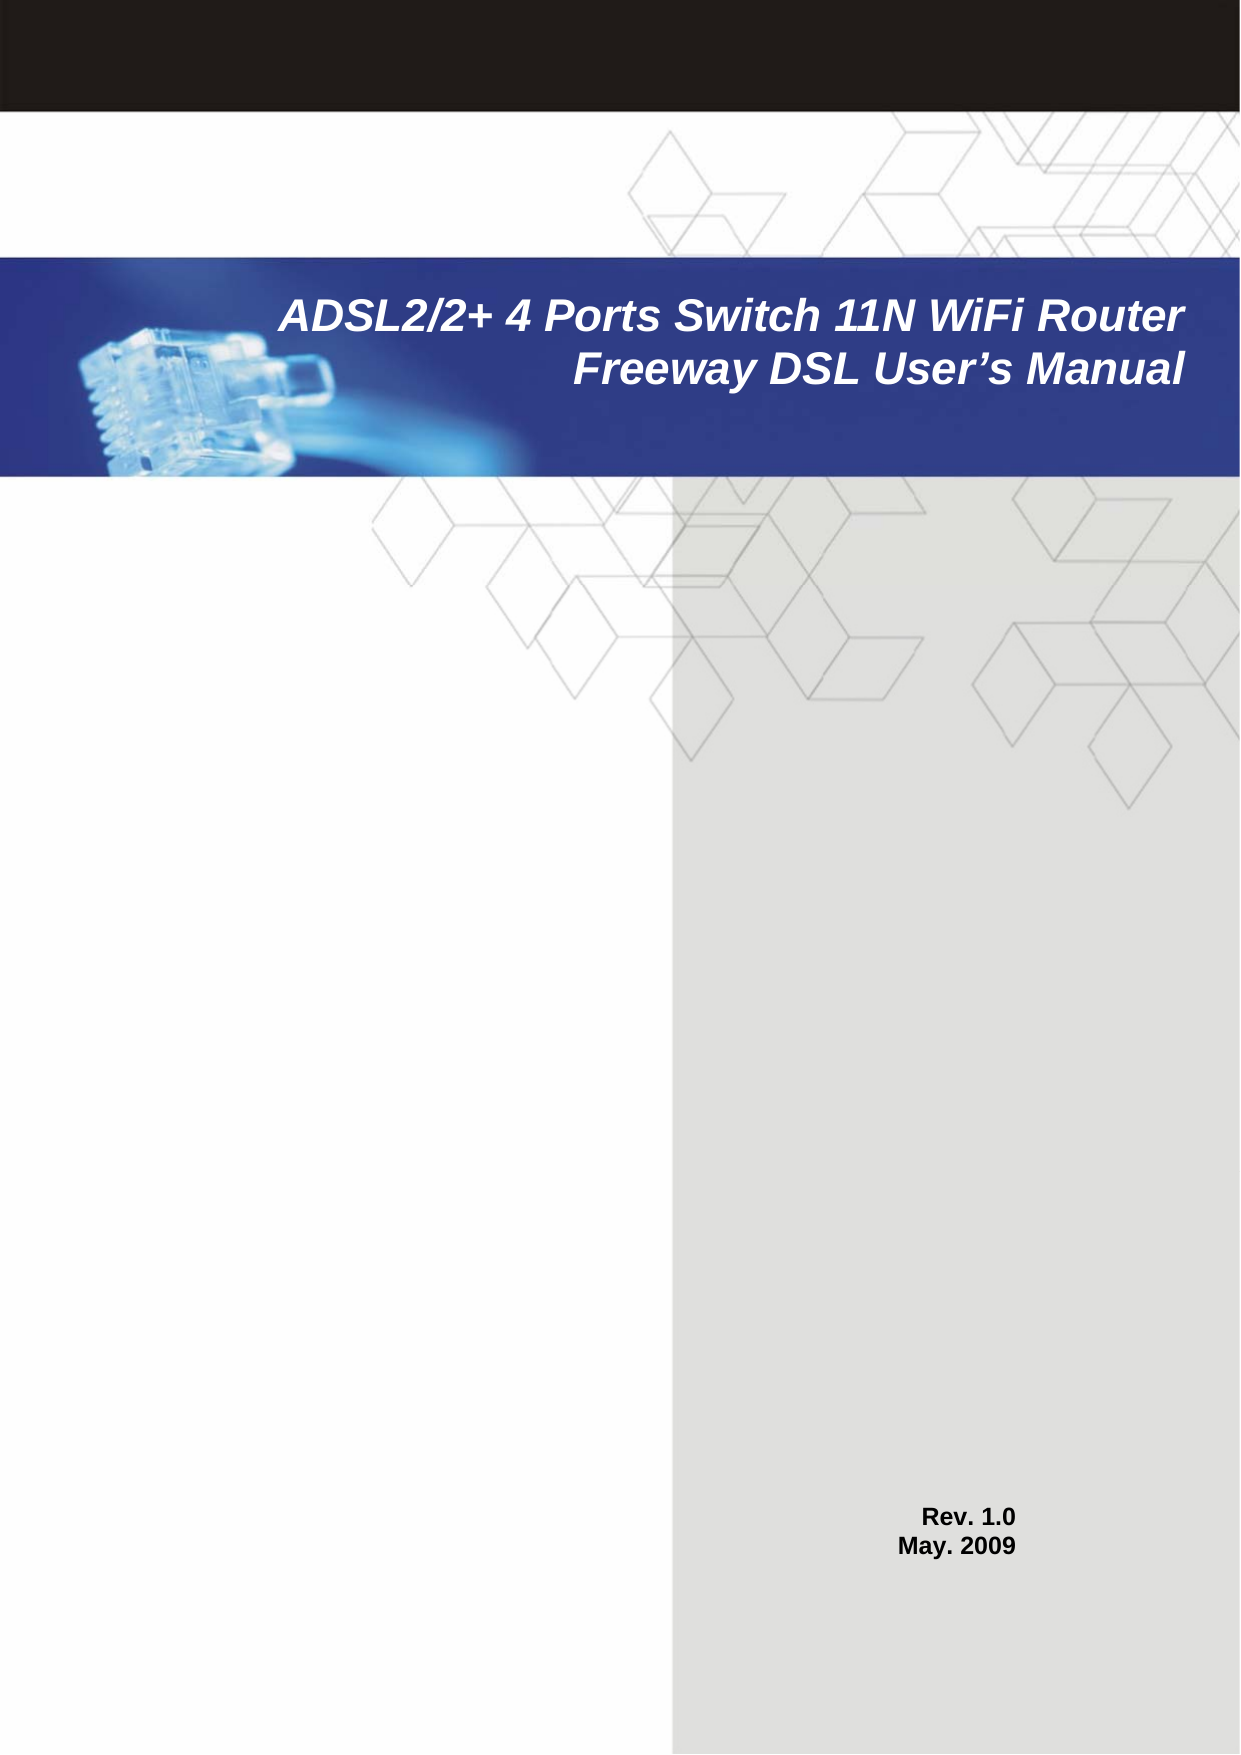 ADSL2/2+ 11N WiFi Router User’s Manual  ADSL2/2+ 4 Ports Switch 11N WiFi Router Freeway DSL User’s Manual  Rev. 1.0 May. 2009 